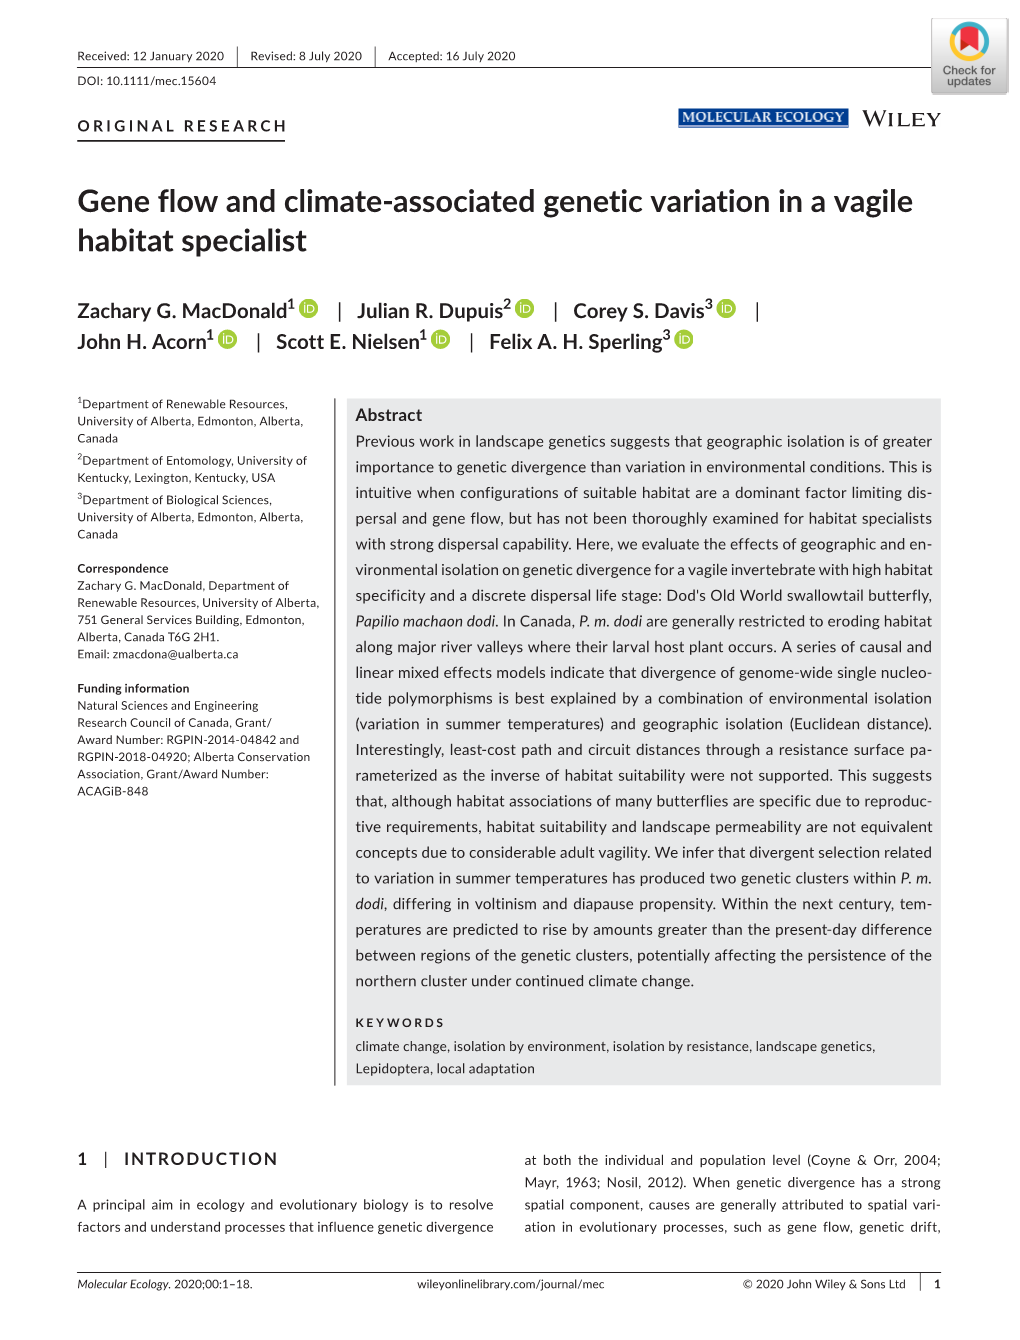 Gene Flow and Climate‐Associated Genetic Variation in a Vagile Habitat